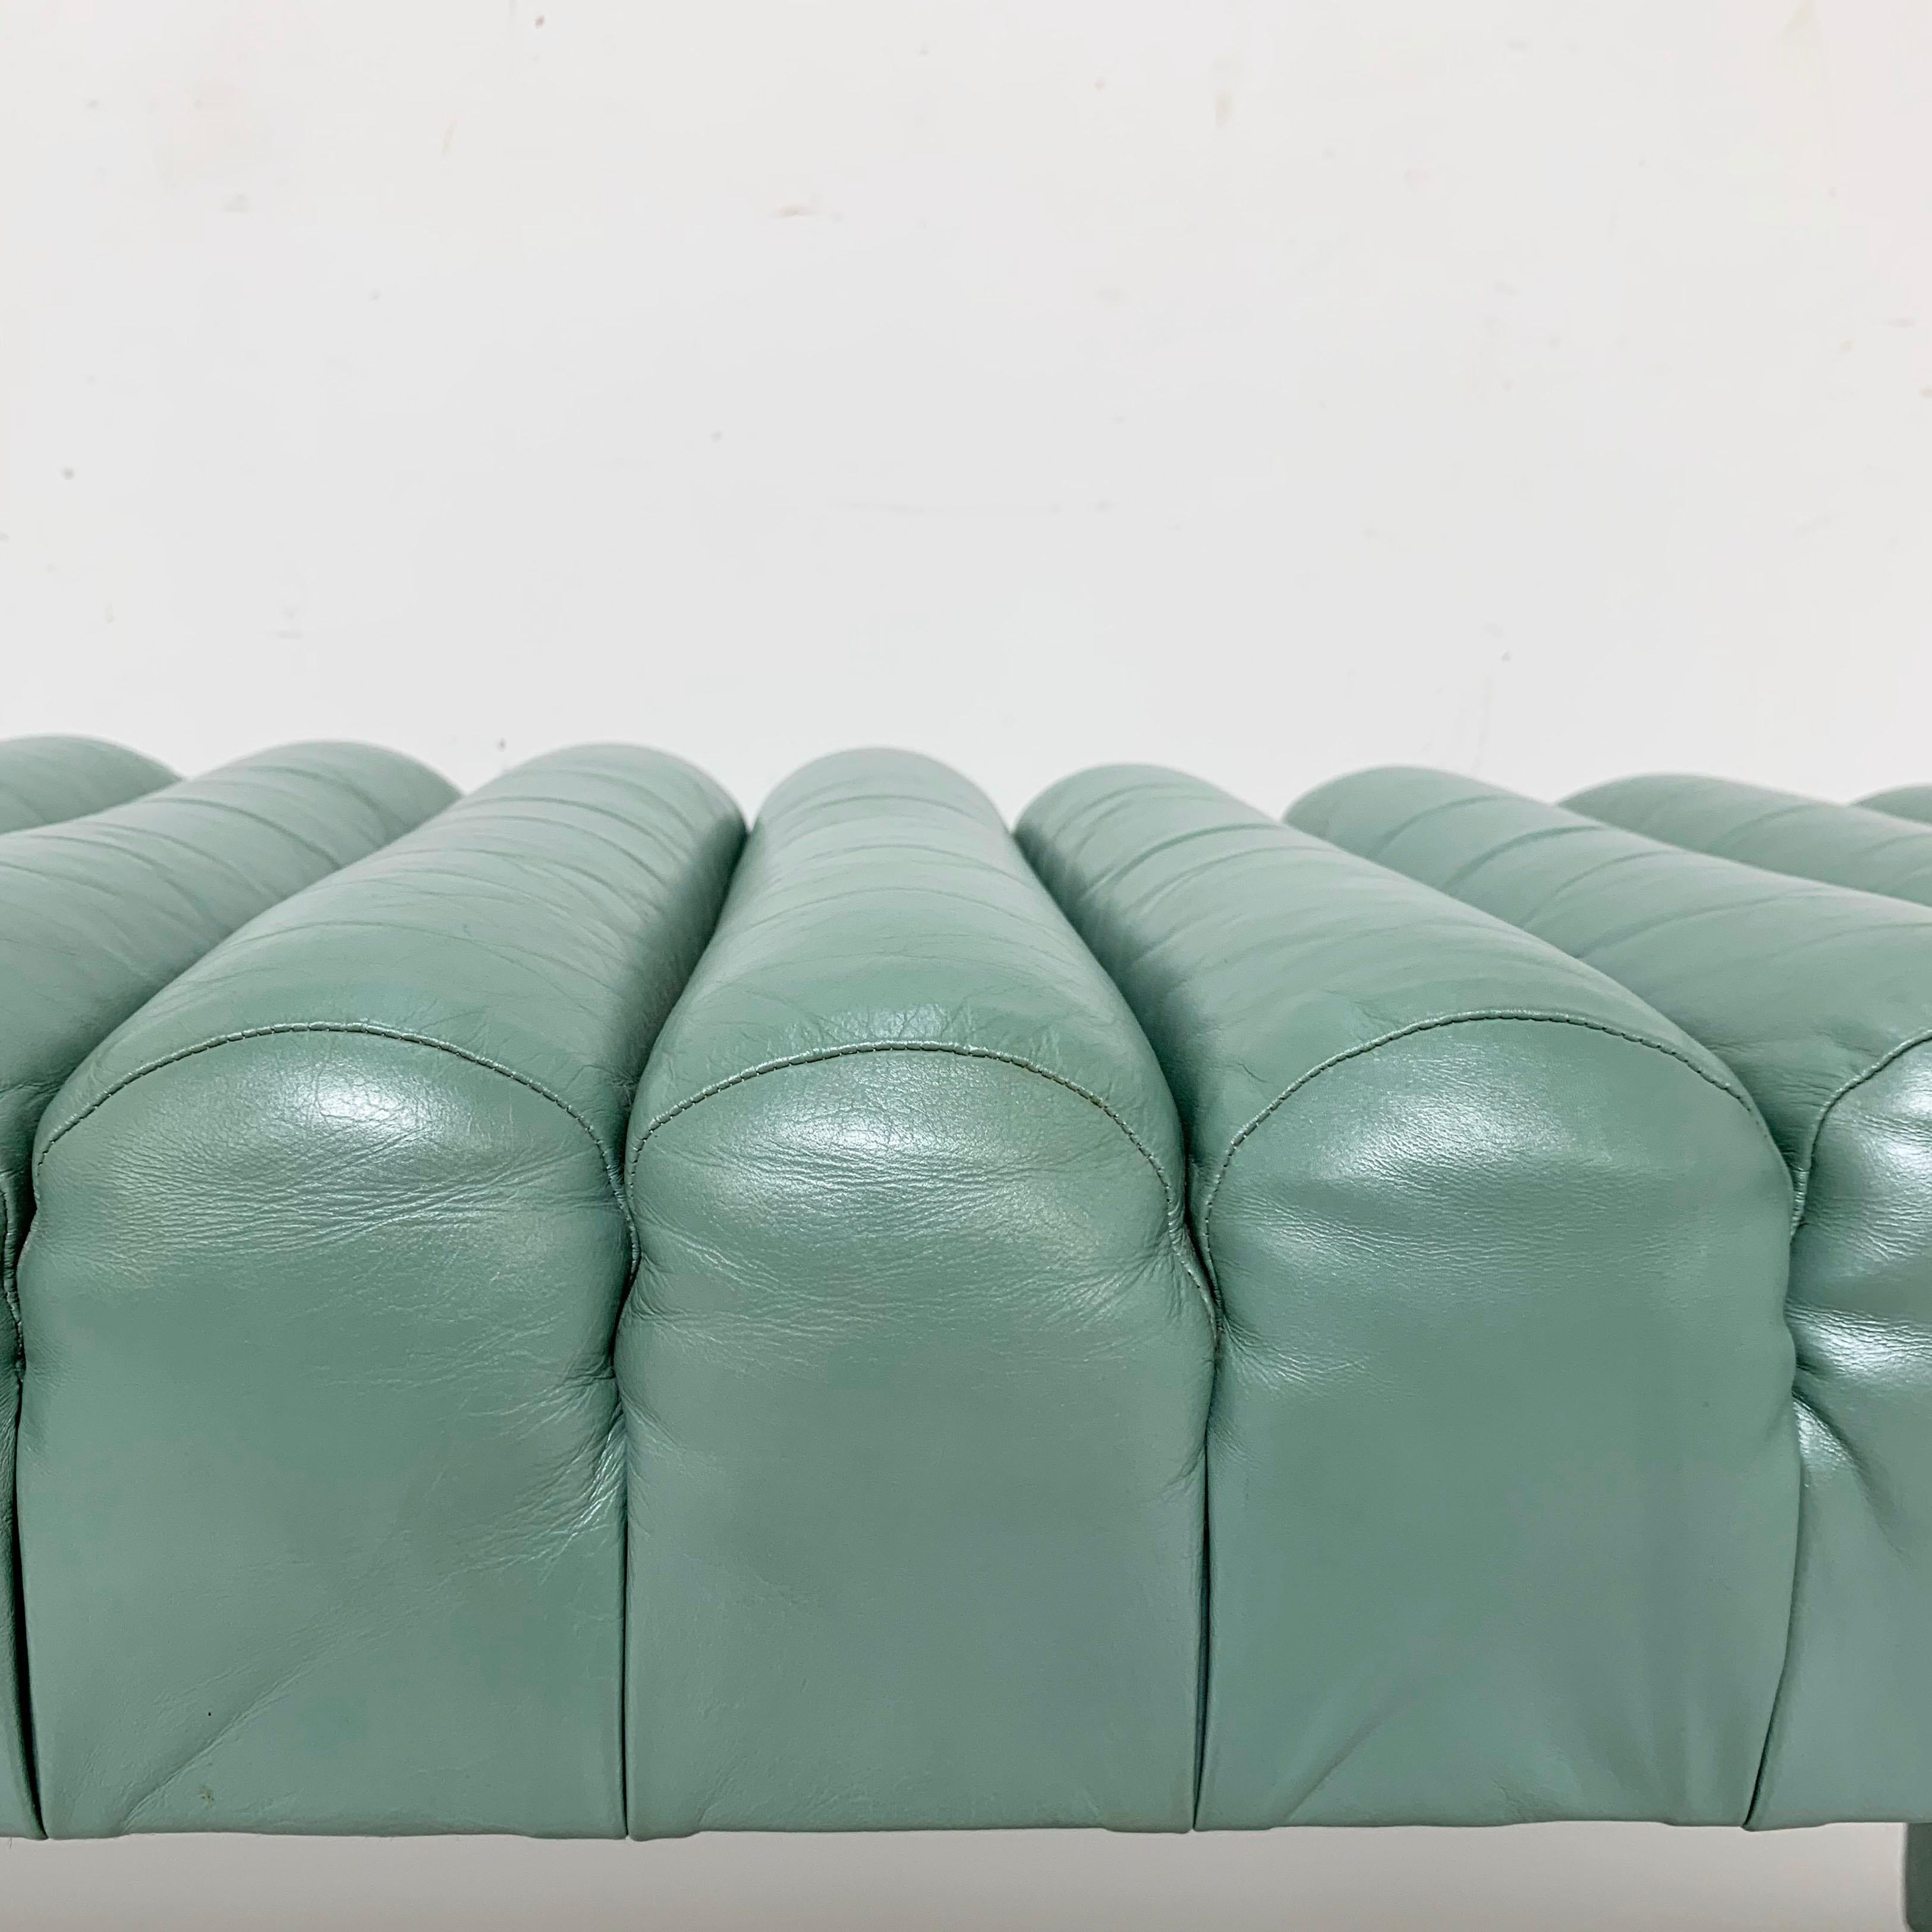 American Postmodern Channel Form Leather Bench, circa 1980s